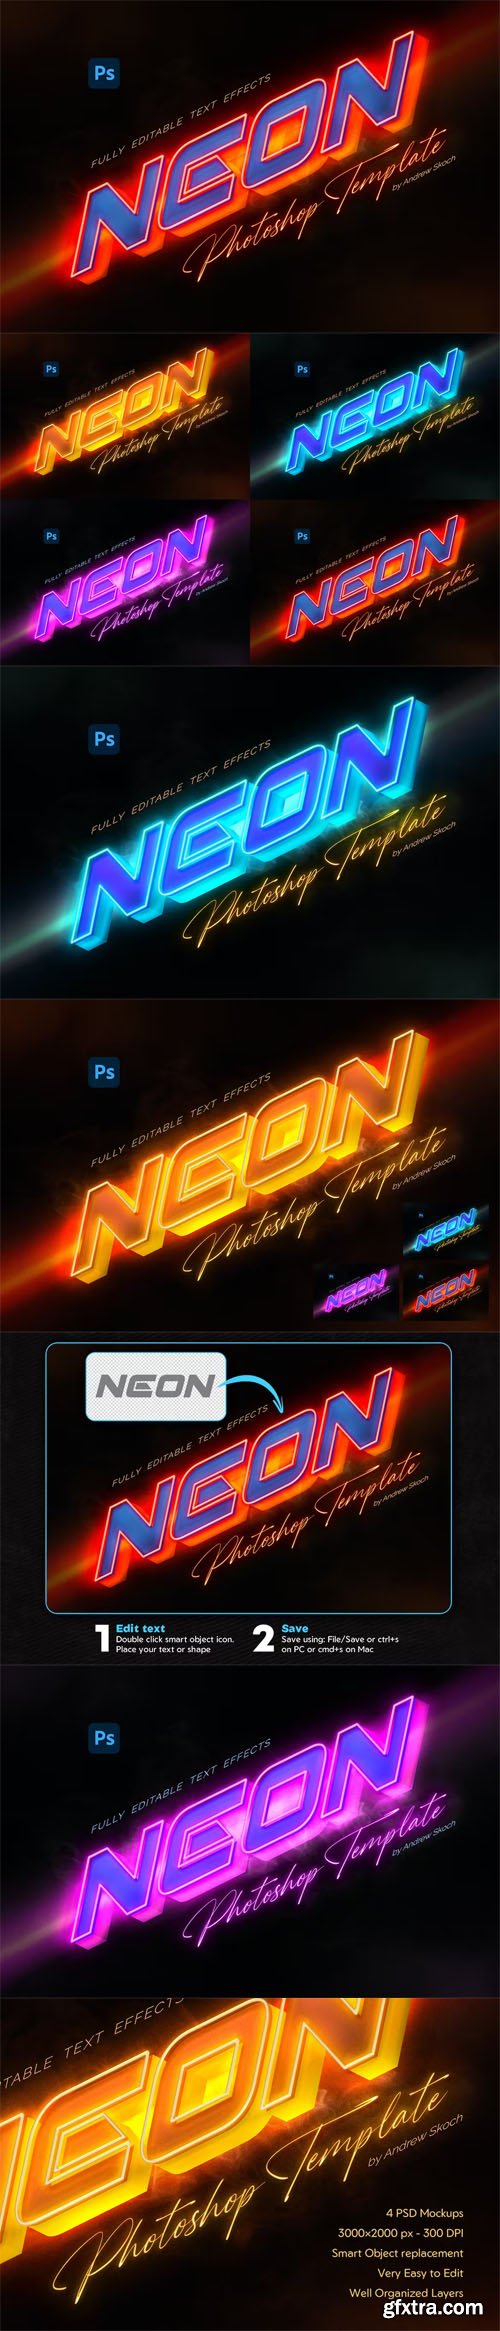 Neon Text Effect Photoshop Template